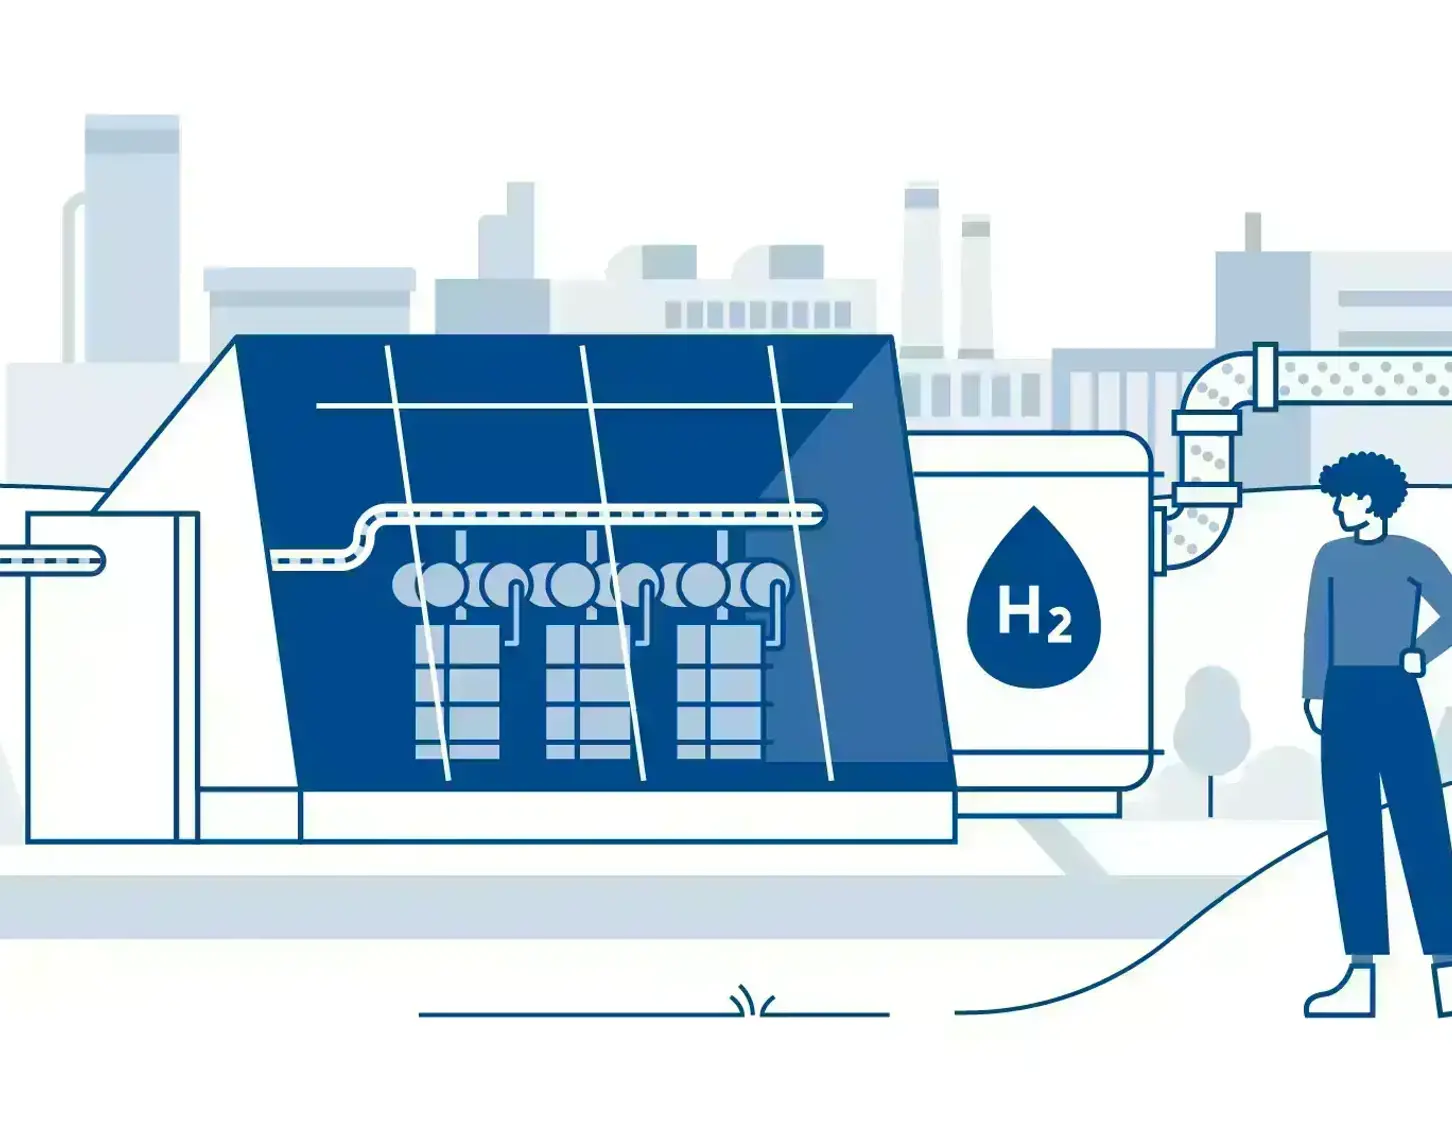 A graphic with a hydrogen plant is shown. In front of it is a person looking at the plant. The chemical symbol H2 is shown on the hydrogen plant.